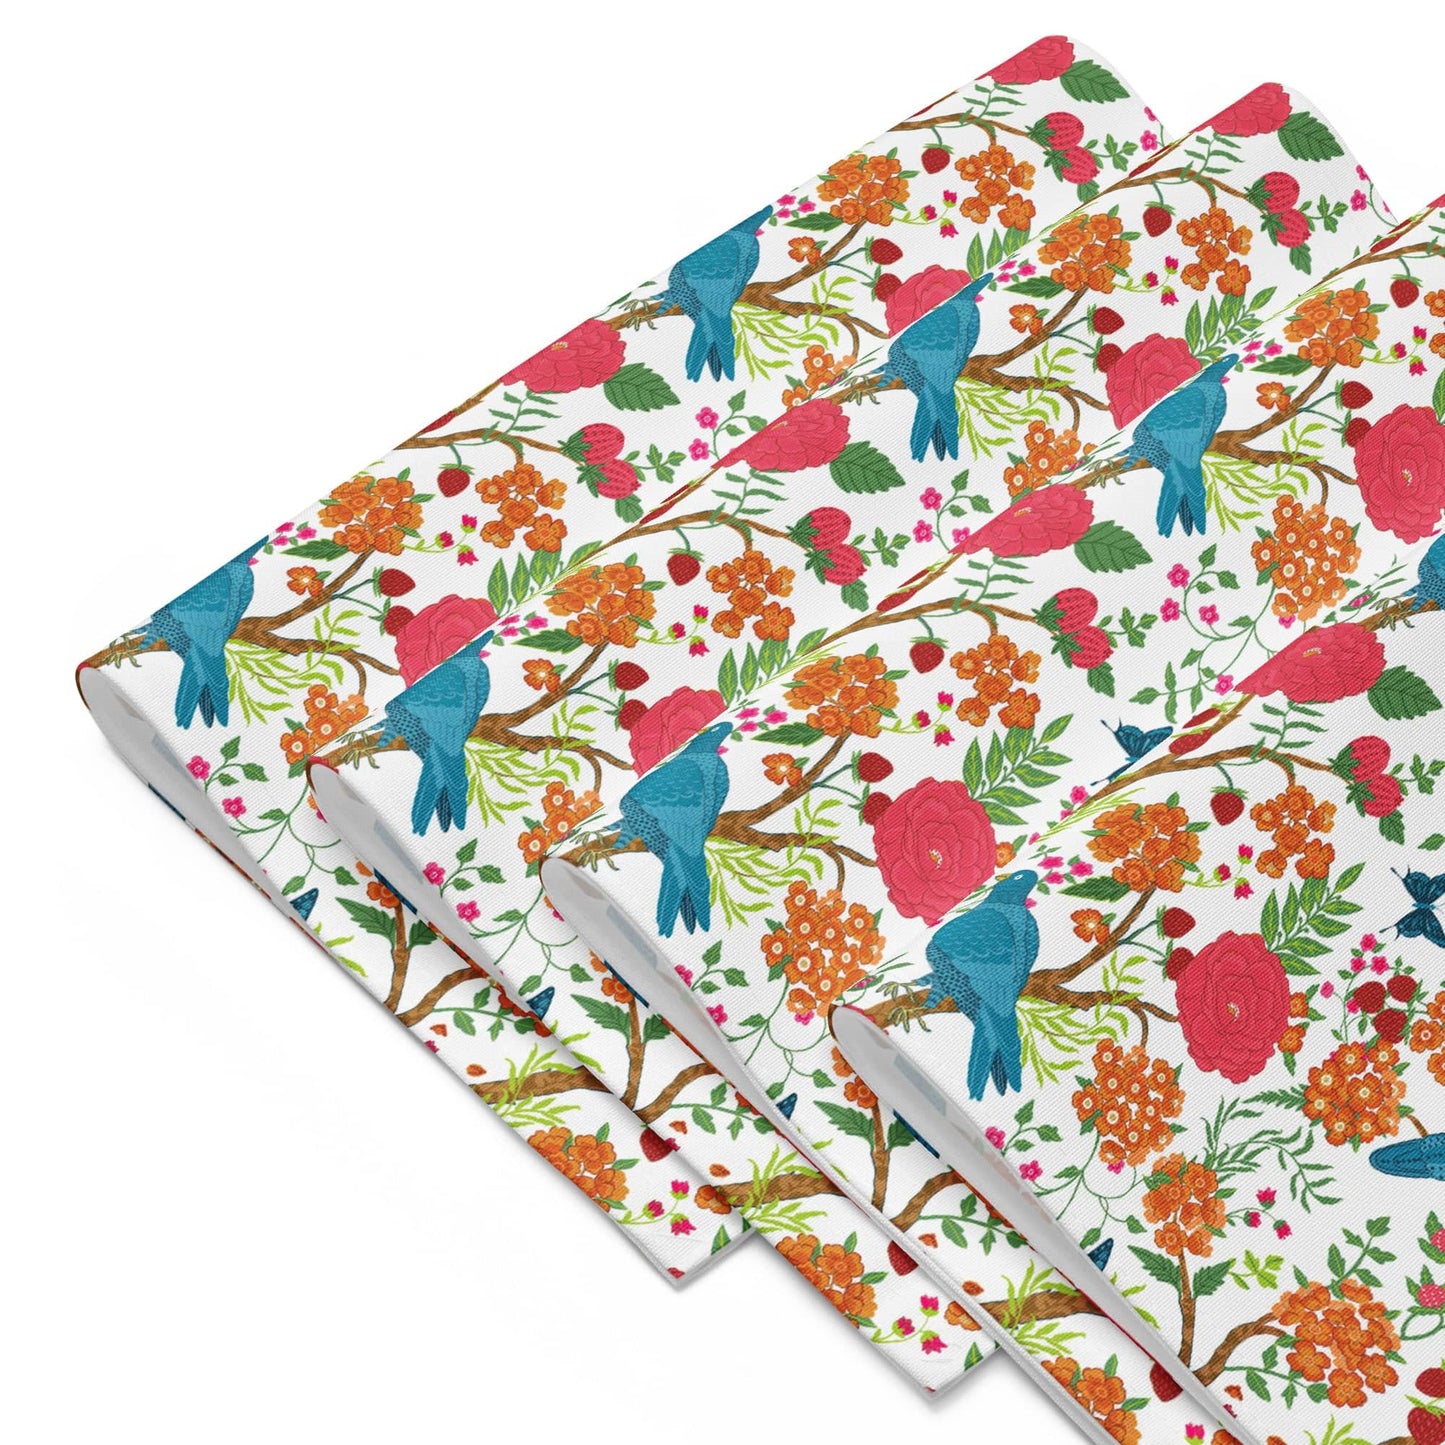 Kate McEnroe New York Set of 4 Chinoiserie Floral and Exotic Bird Botanical Garden Placemats in Pink, Green, Orange and Blue by Kate McEnroe New York - KM13809925 Placemats 9417303_17484